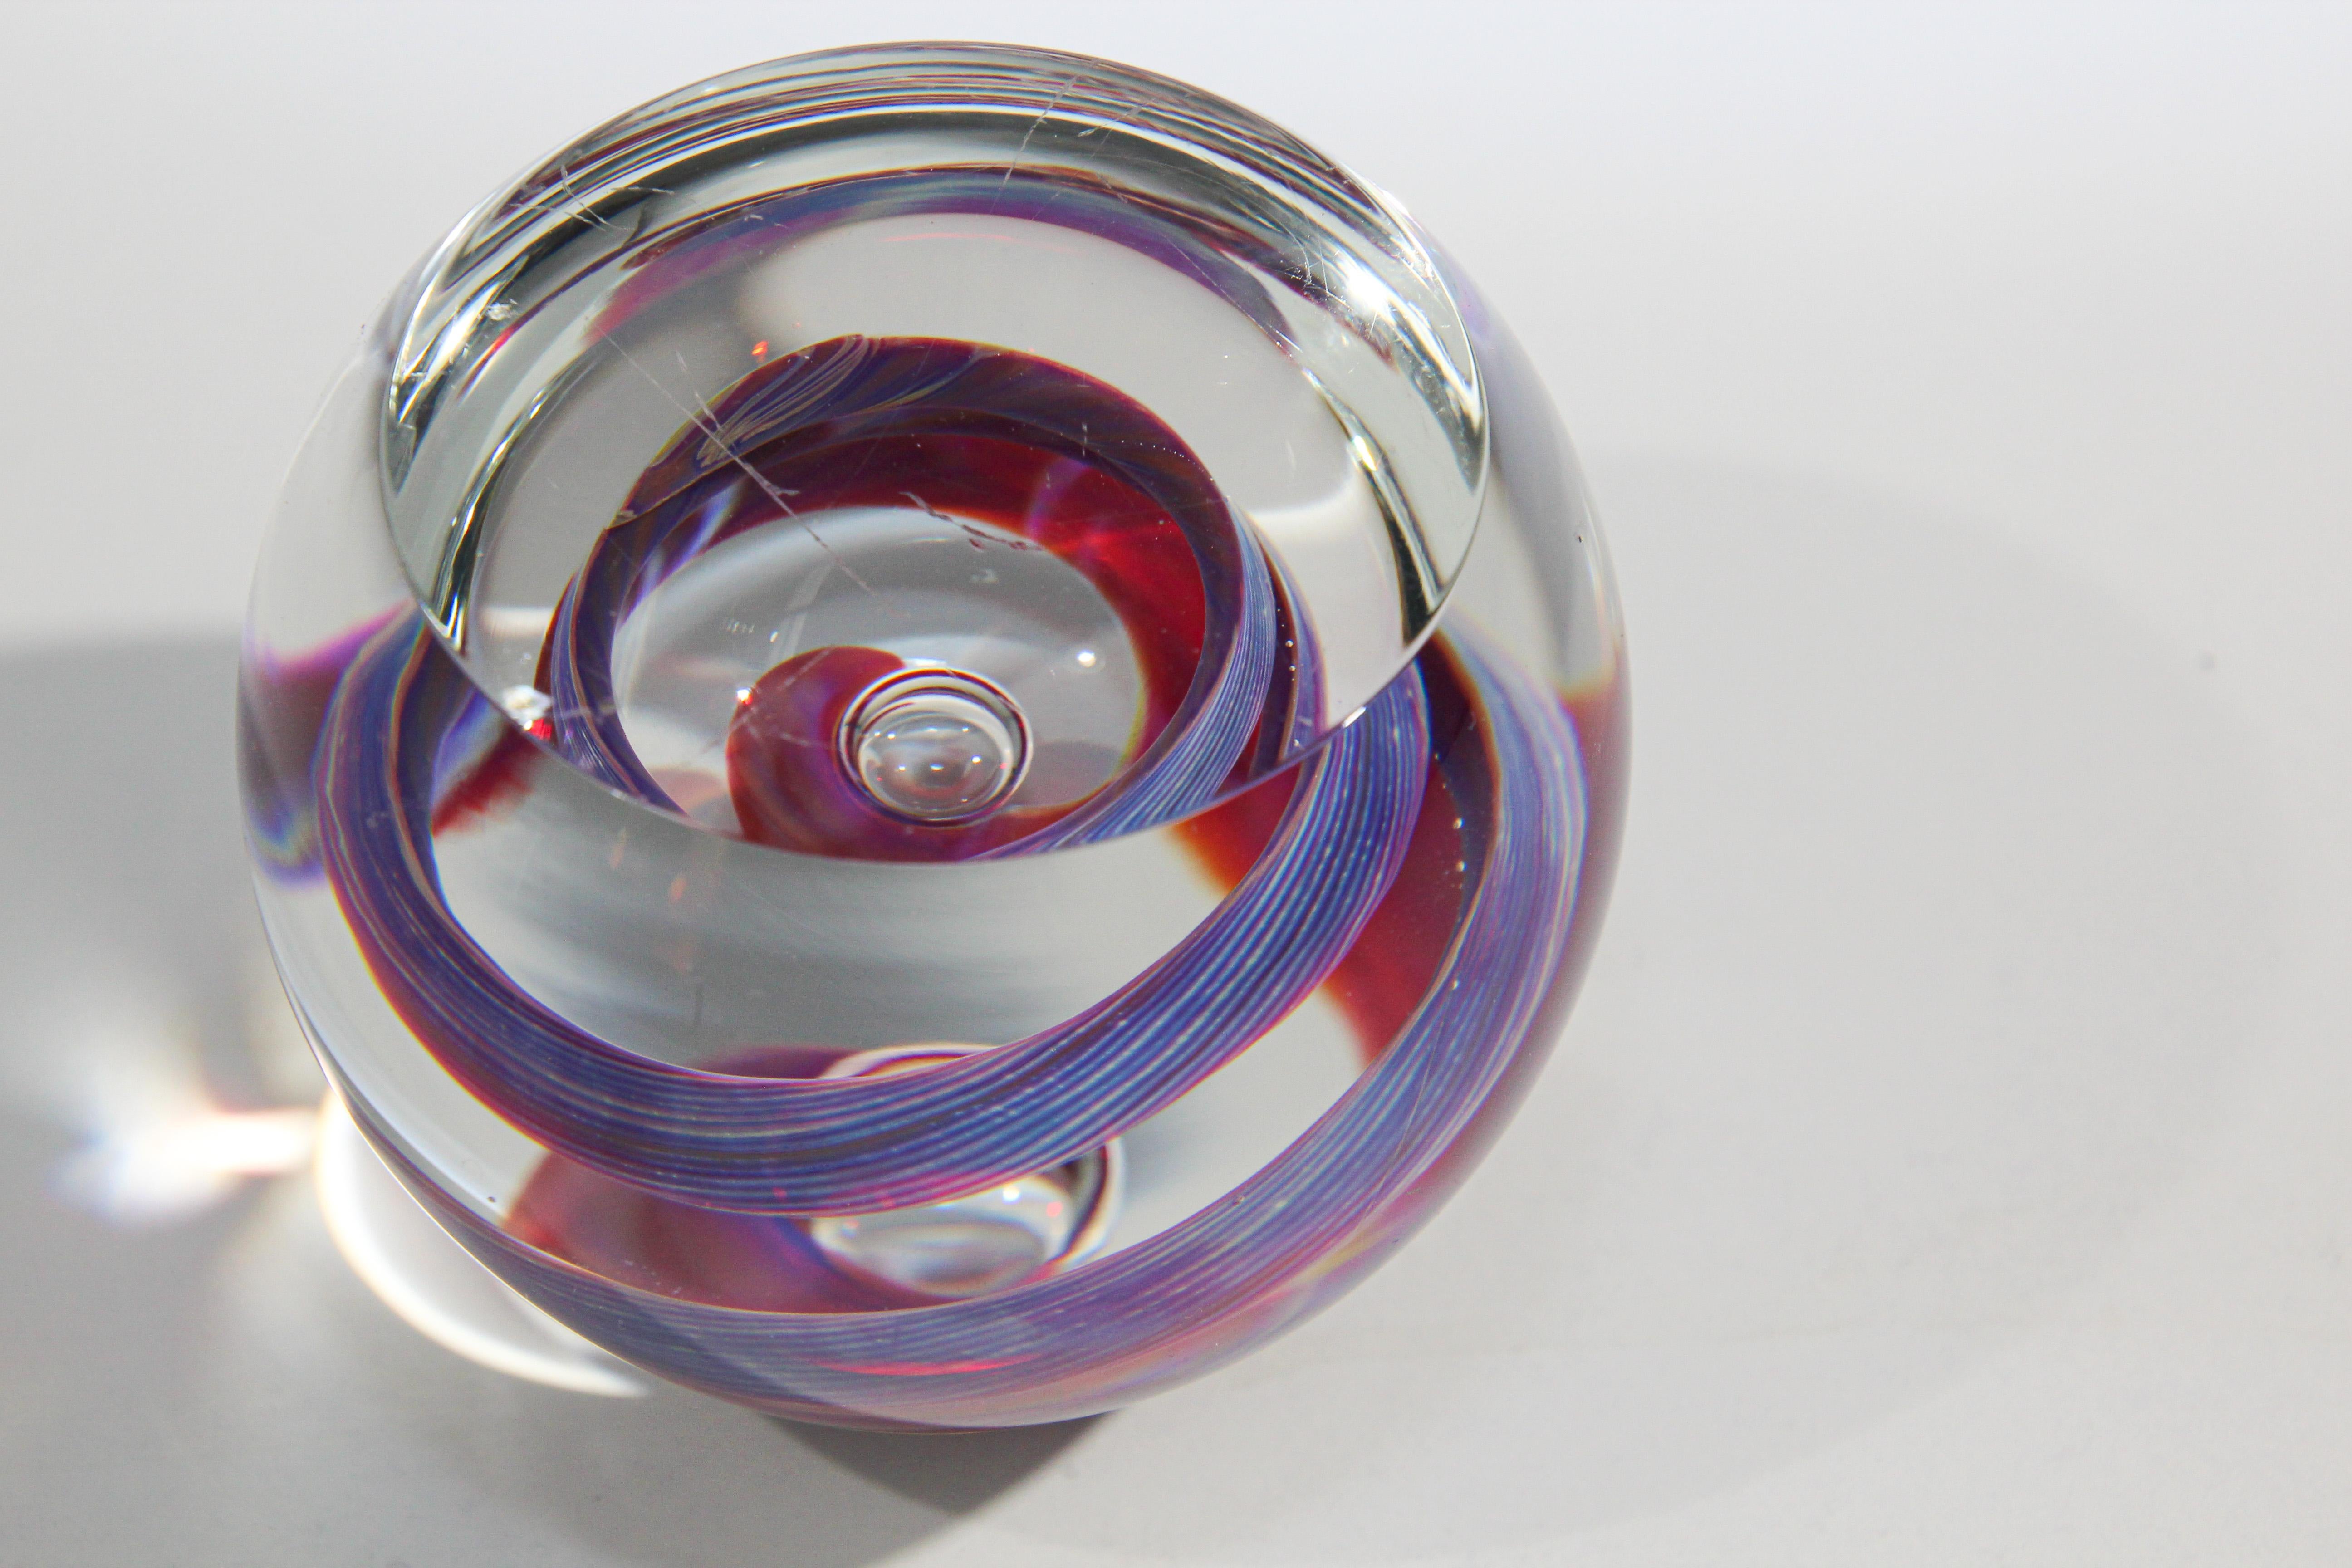 Vintage Scottish Art Glass Abstract Design Paper Weight 1999 2